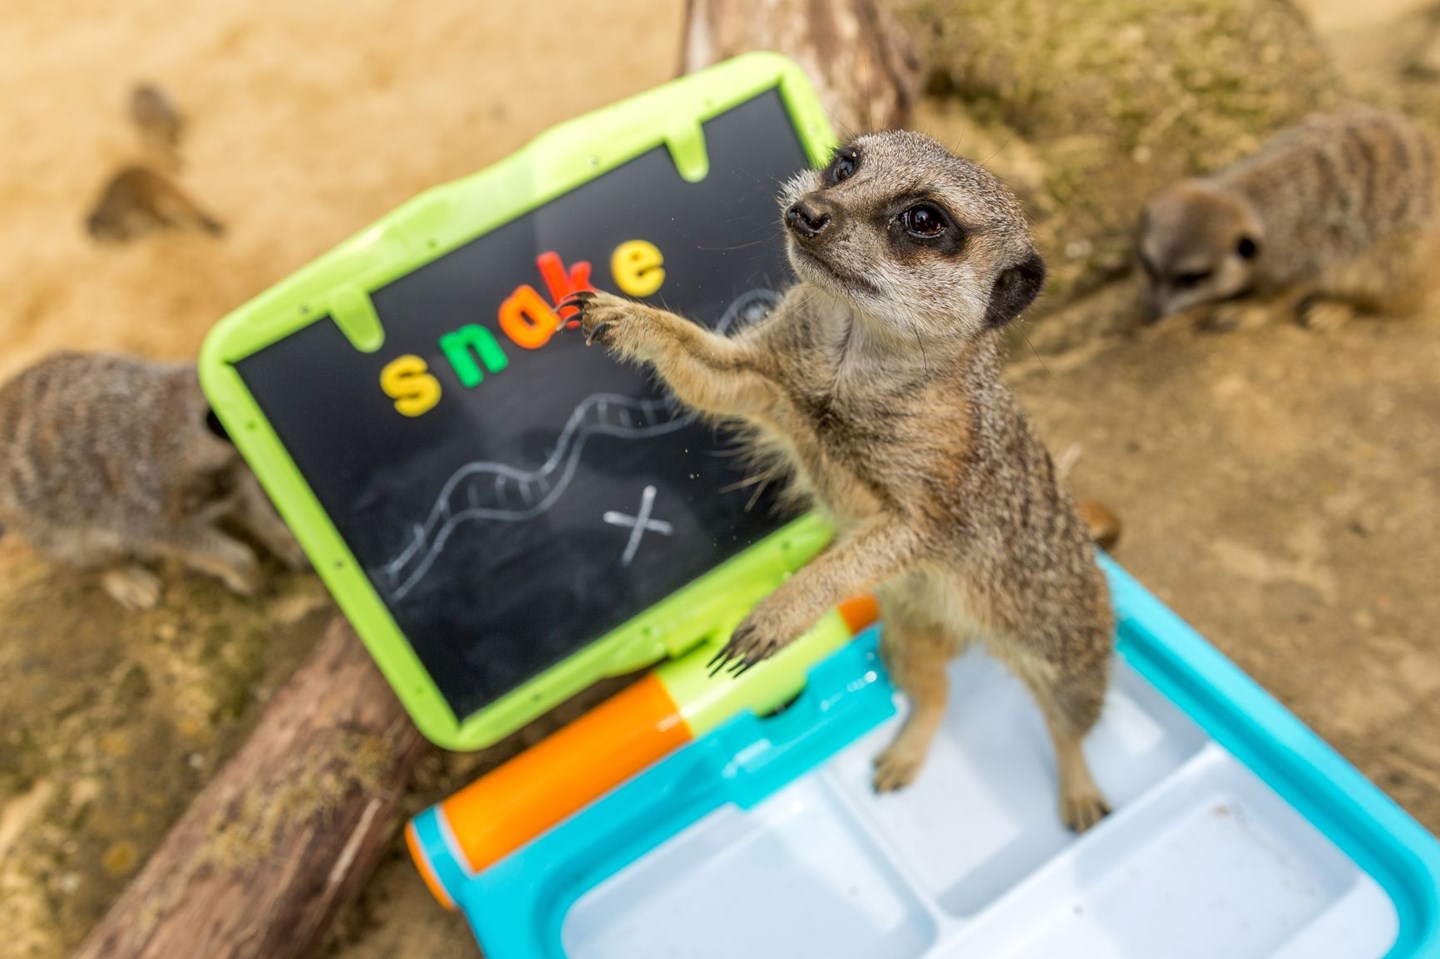 A meerkat stands on its back legs and reaches up towards the camera with an enrichment toy setup behind it